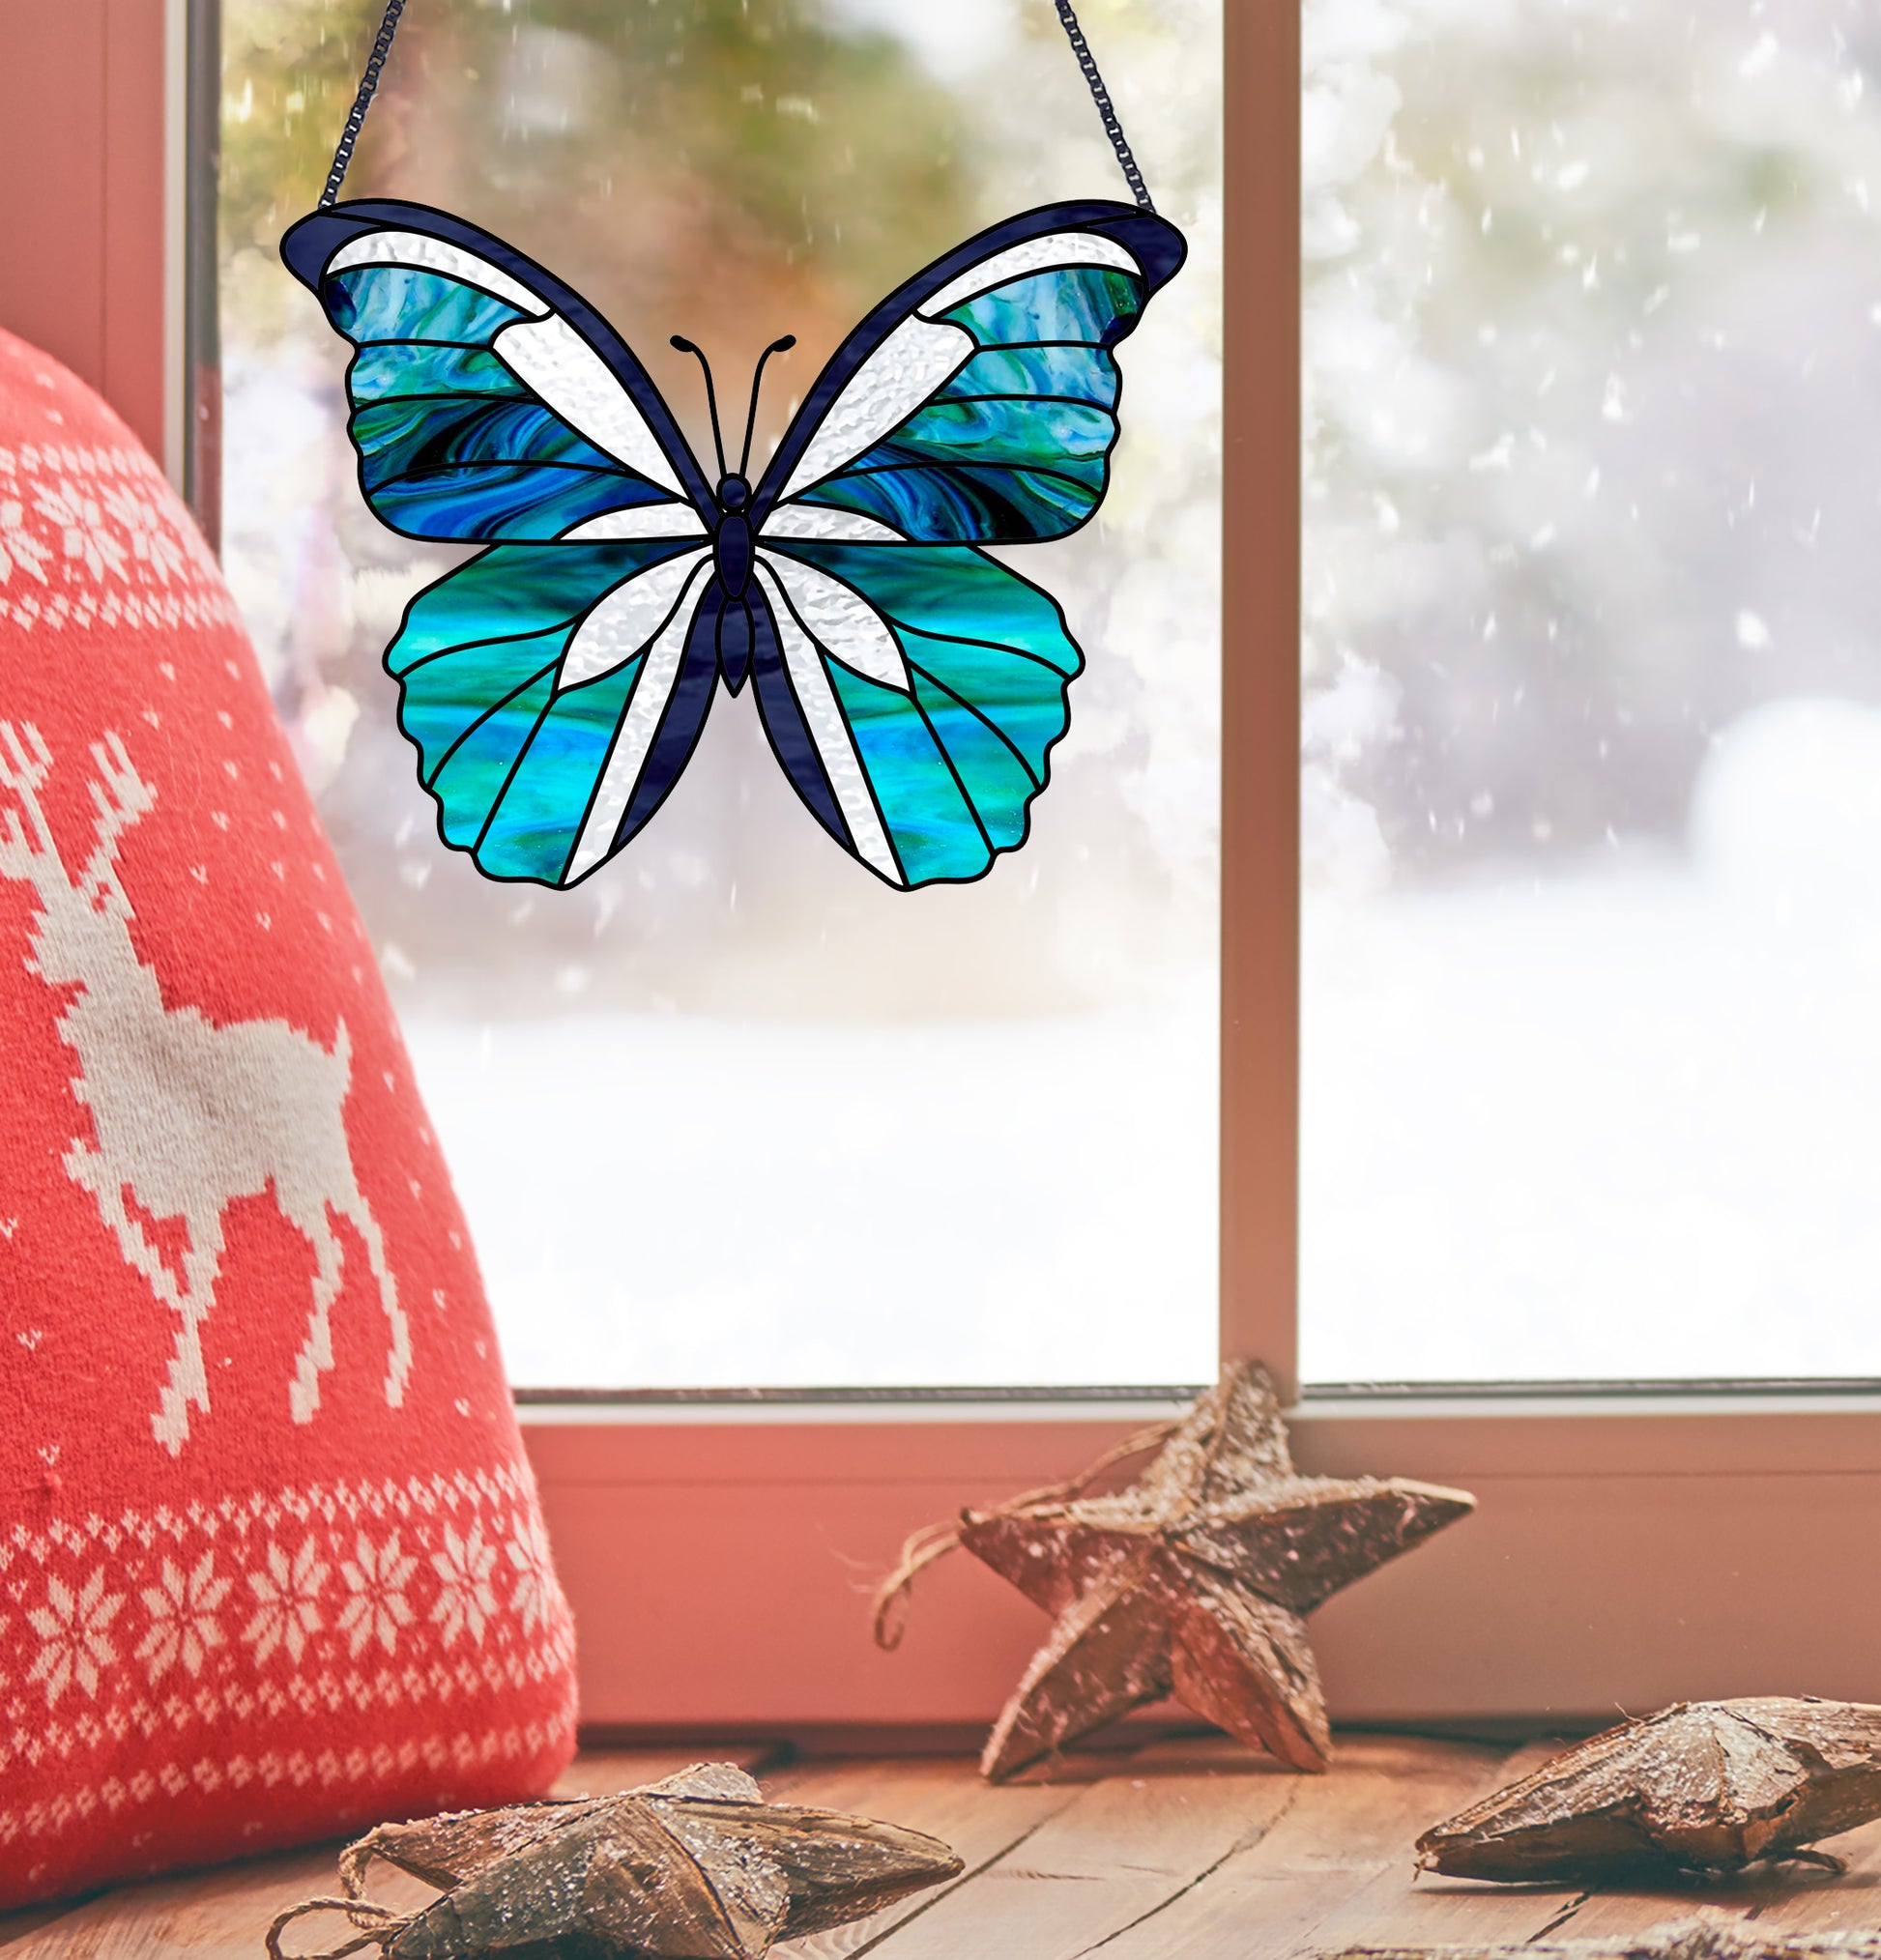 Butterfly stained glass patterns, pack of four, instant download, one butterfly shown in window with Christmas decorations